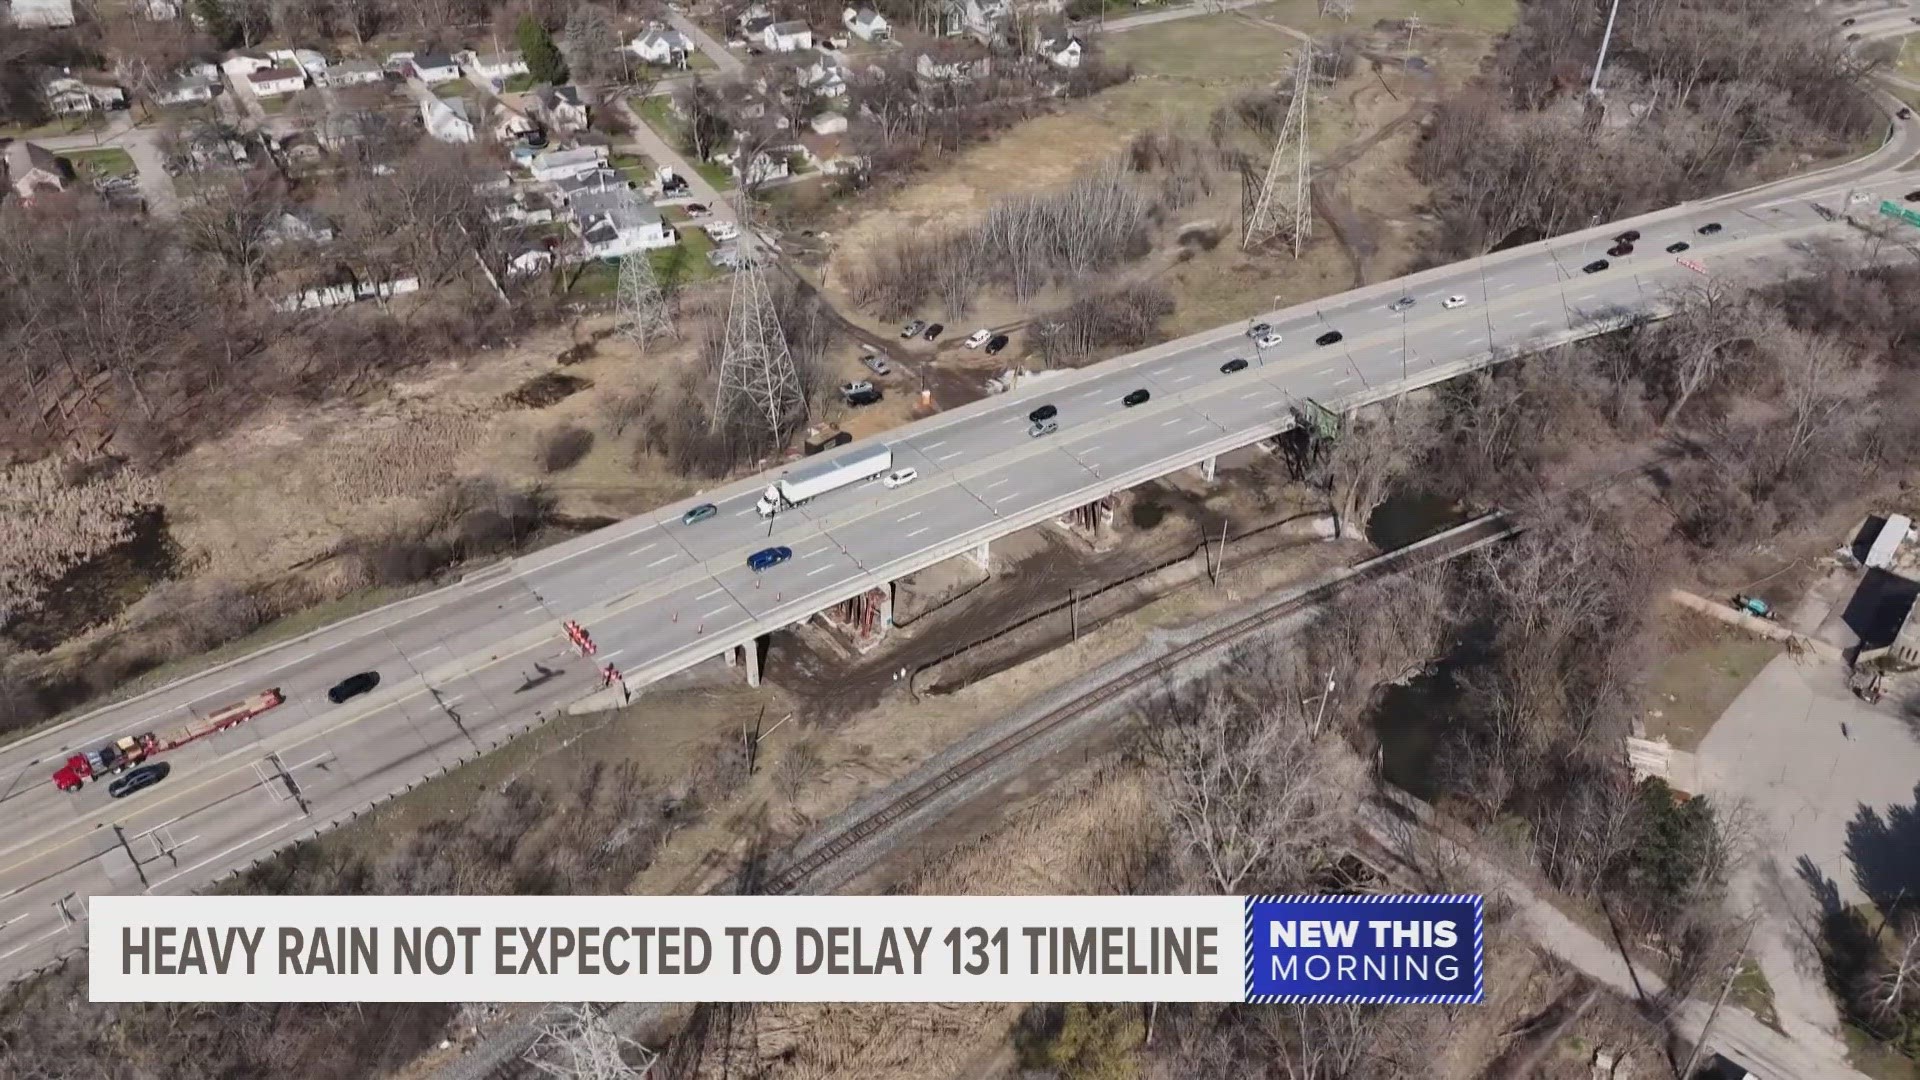 While the rain is expected to put construction on pause, MDOT said the weather should not impact the timeline of the project.